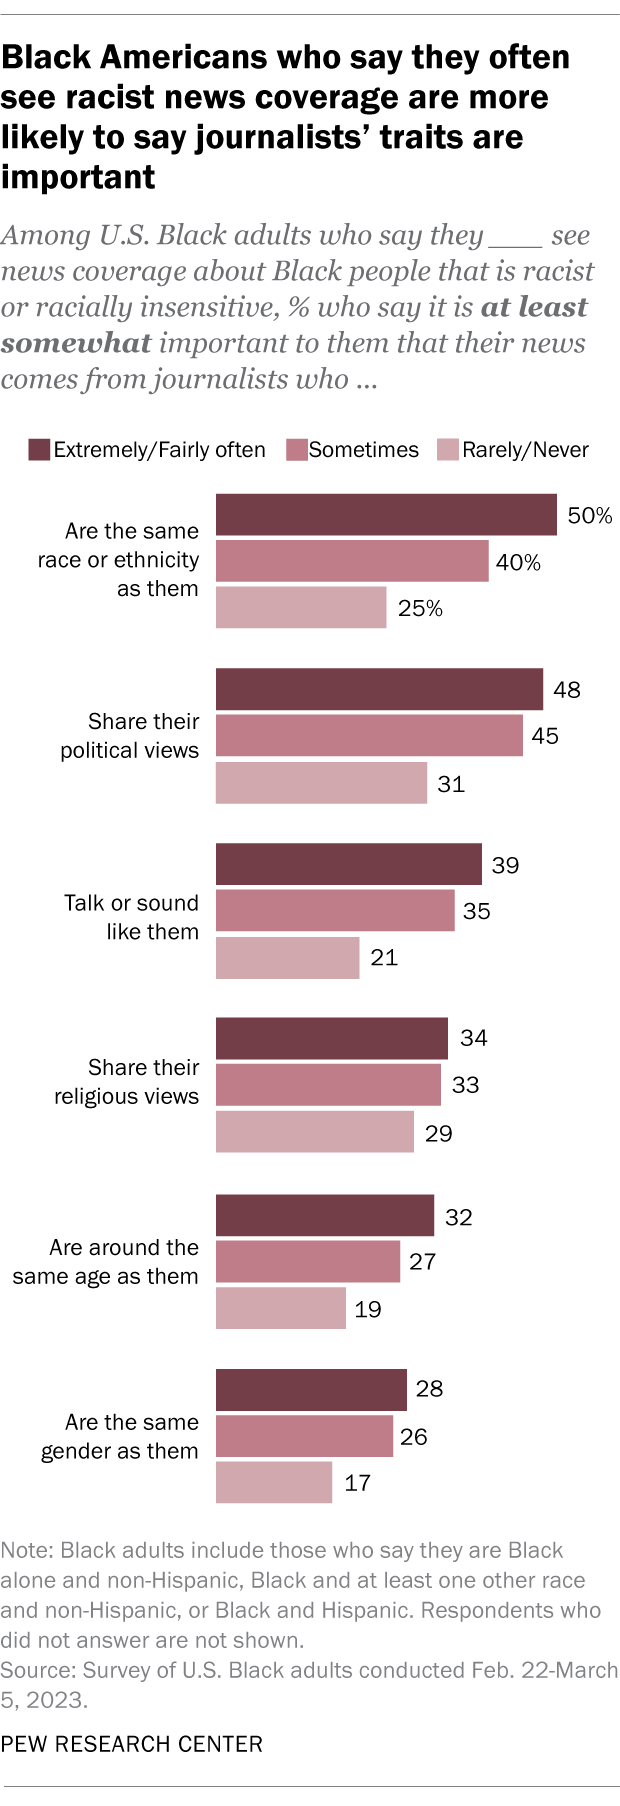 A horizontal stacked bar chart showing that Black Americans who say they often see racist news coverage are more likely to say journalists’ traits are important.